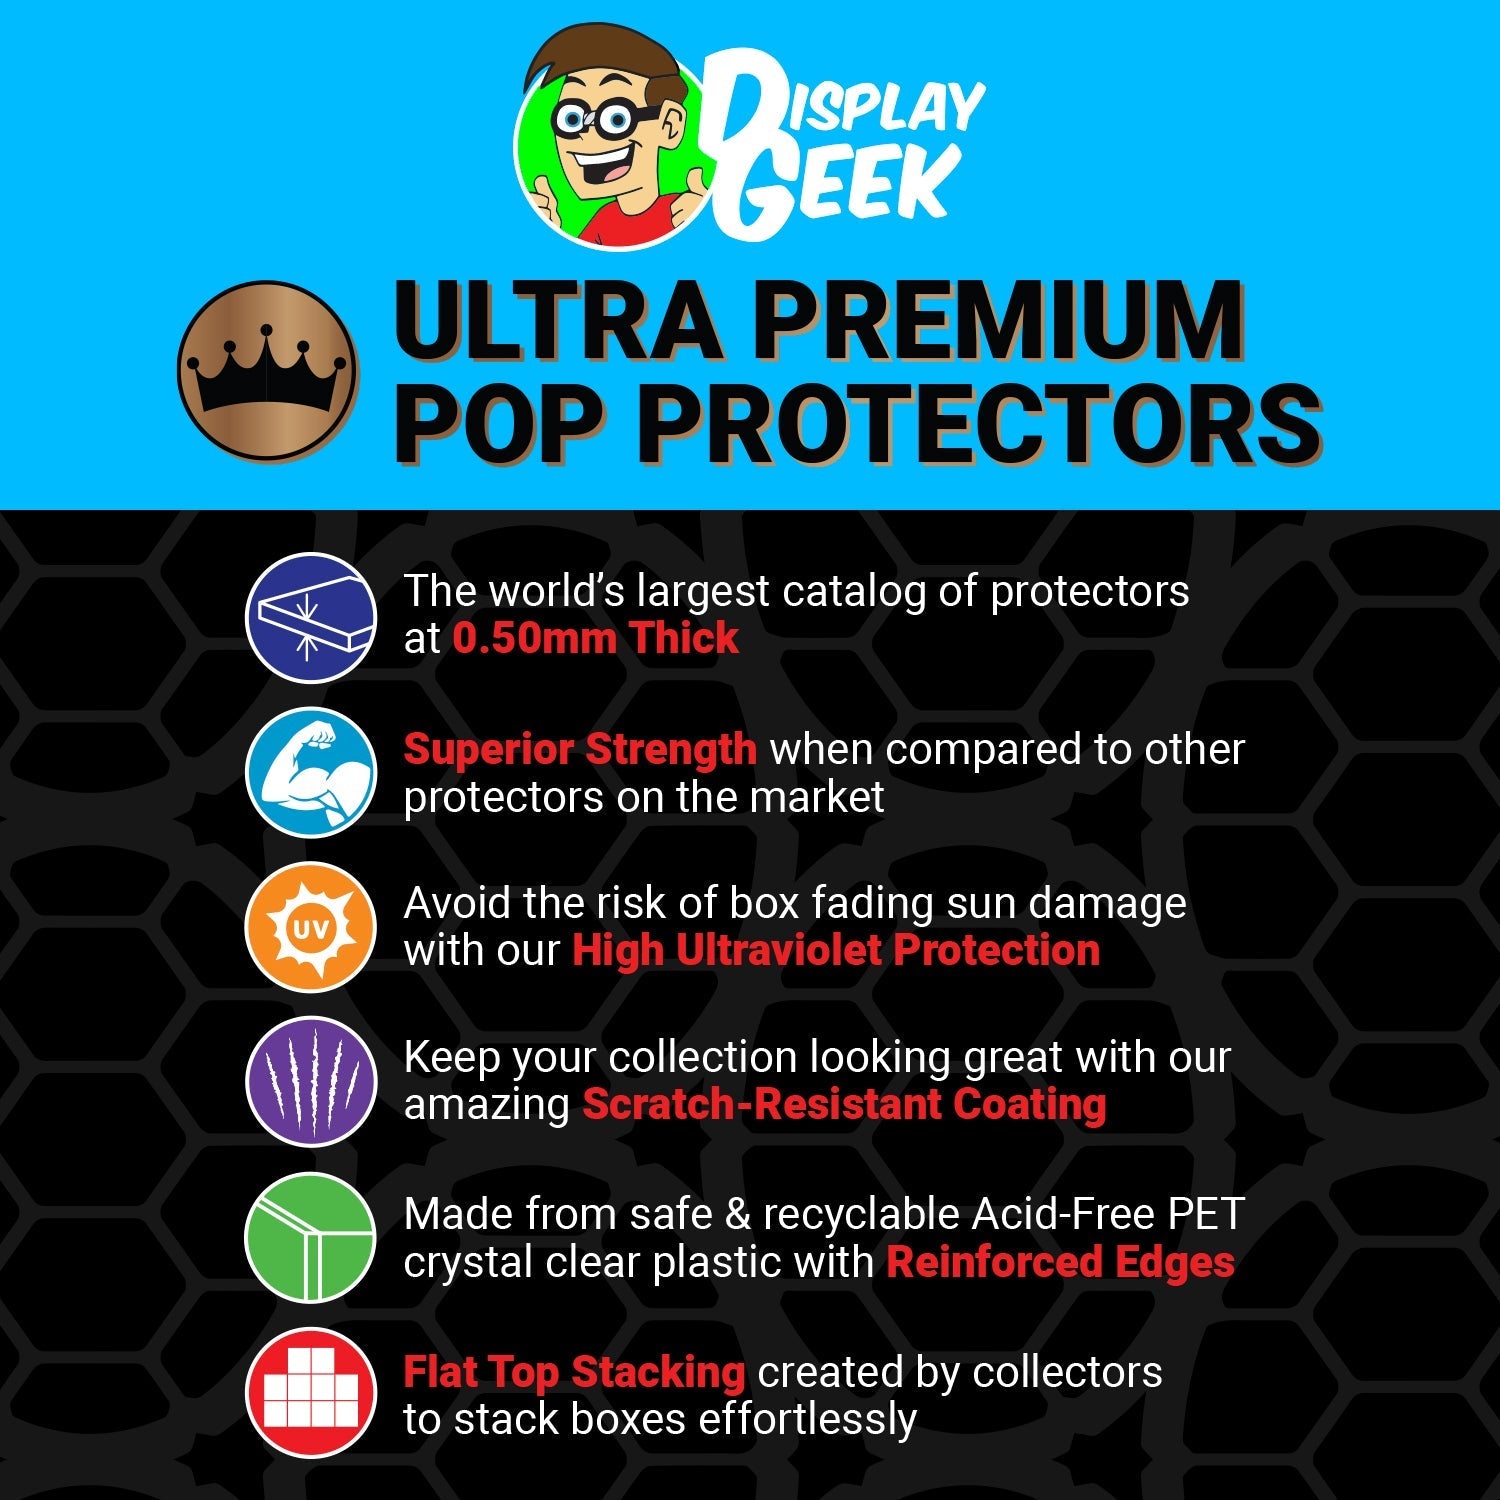 Pop Protector for John Hammond with Gates #30 Funko Pop Town - PPG Pop Protector Guide Search Created by Display Geek